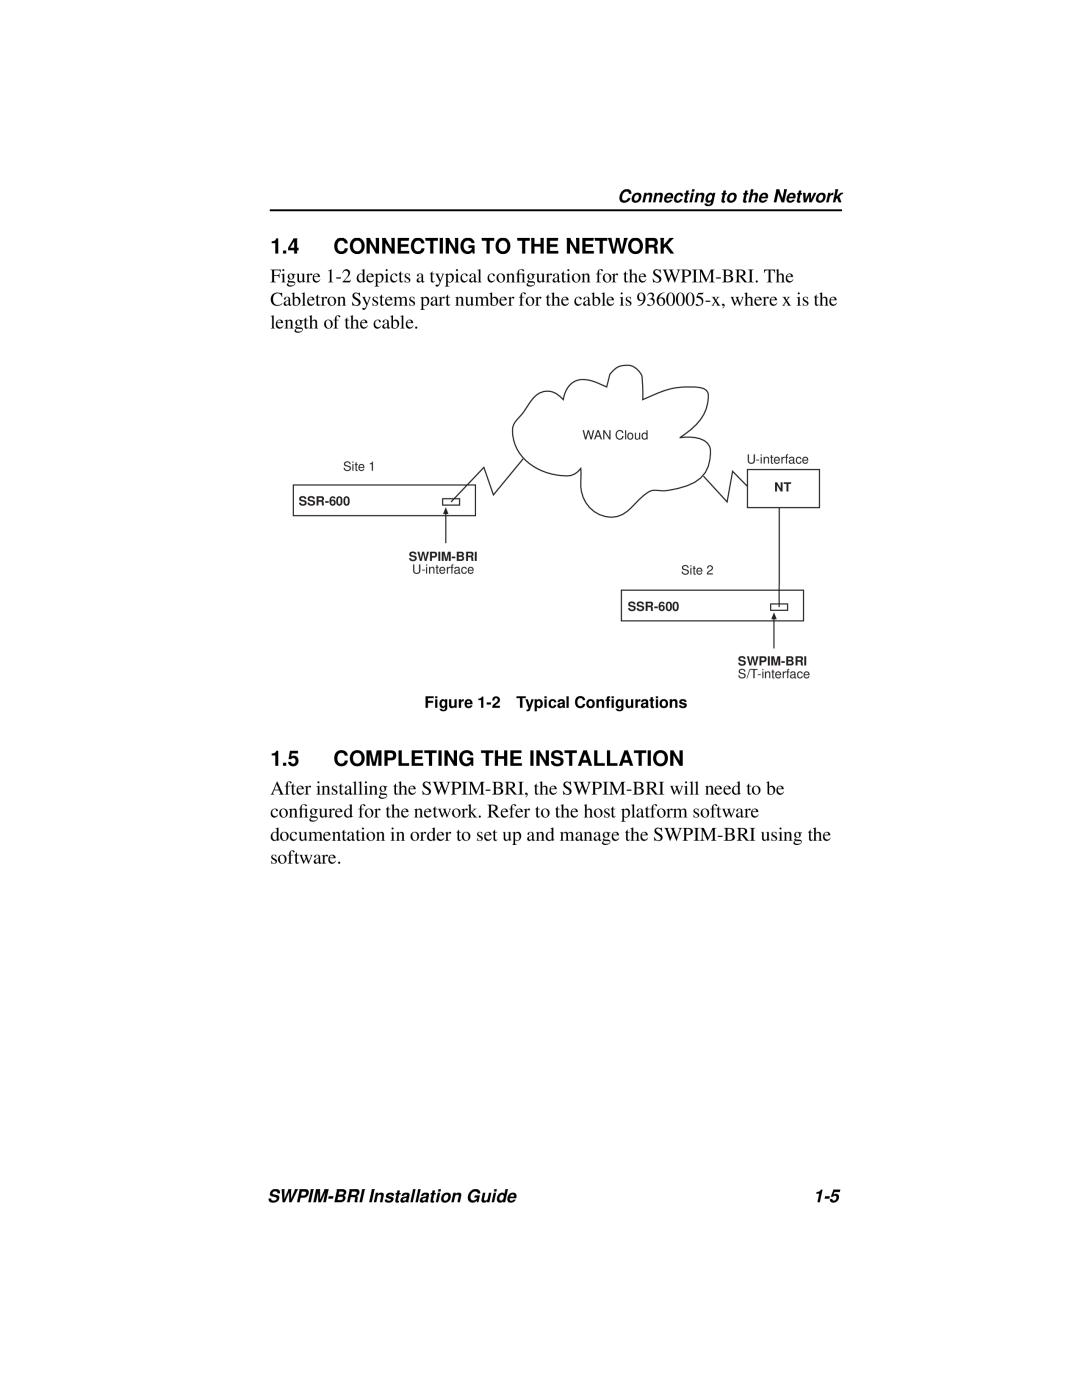 Cabletron Systems SWPIM-BRI manual Connecting To The Network, Completing The Installation, 2 Typical Conﬁgurations 